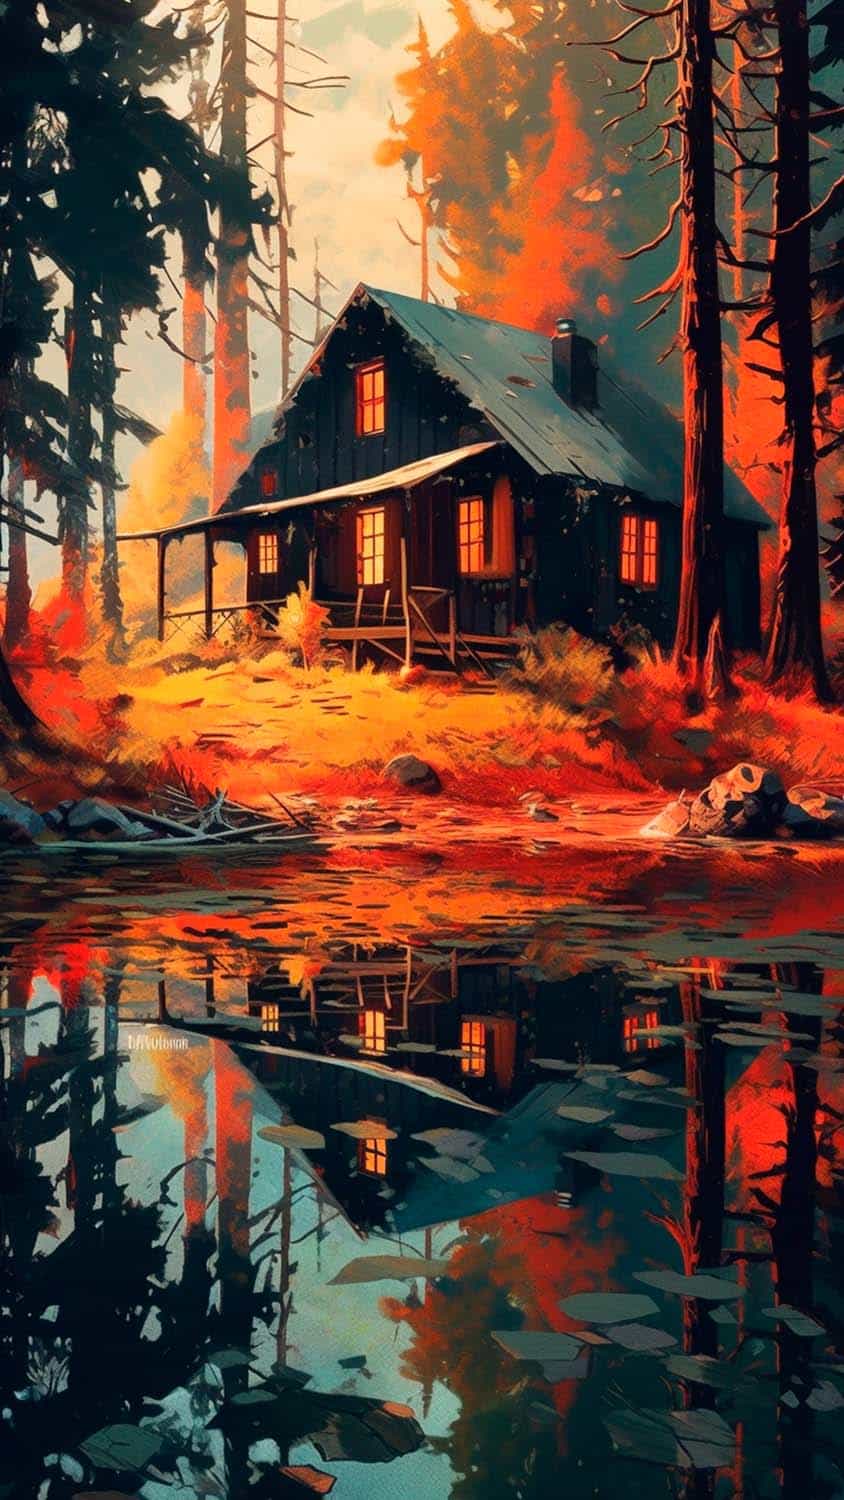 House Reflection Forest Water iPhone Wallpaper 4K